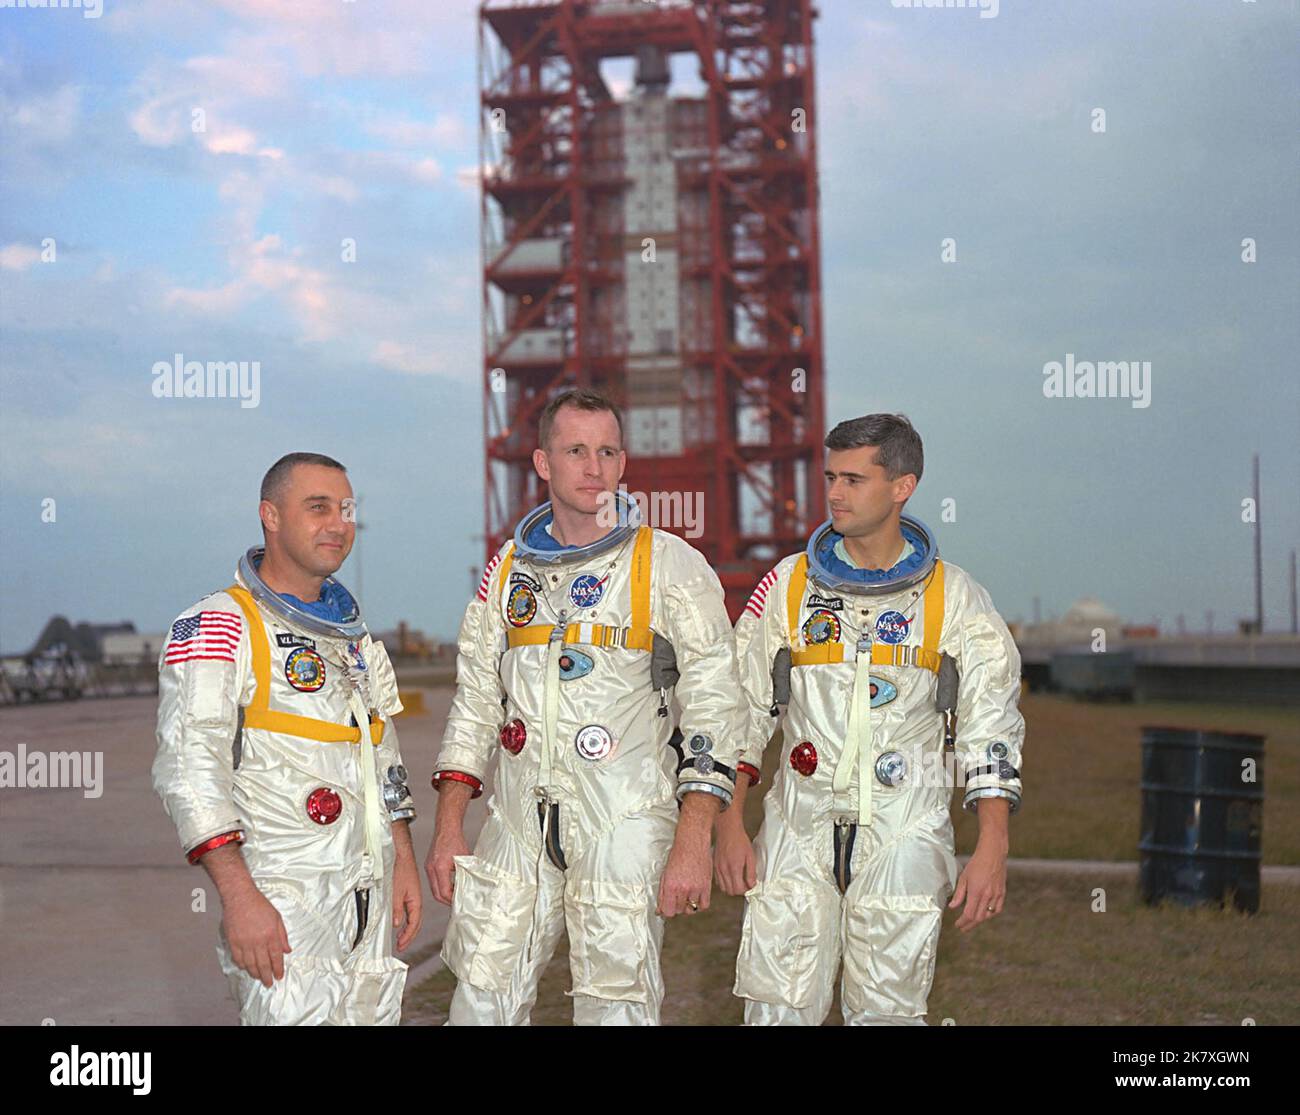 Apollo astronauts, left to right, Gus Grissom, Ed White, and Roger Chaffee, pose in front of Launch Complex 34, which housed the Saturn 1 rocket scheduled for the Apollo 1 mission. The mission was to be the first crewed flight of the Apollo program with a planned launch on Feb. 21, 1967. On Jan. 27, tragedy struck on the launch pad during a preflight test. Astronauts Grissom, White and Chaffee lost their lives when a fire swept through the command module. Stock Photo